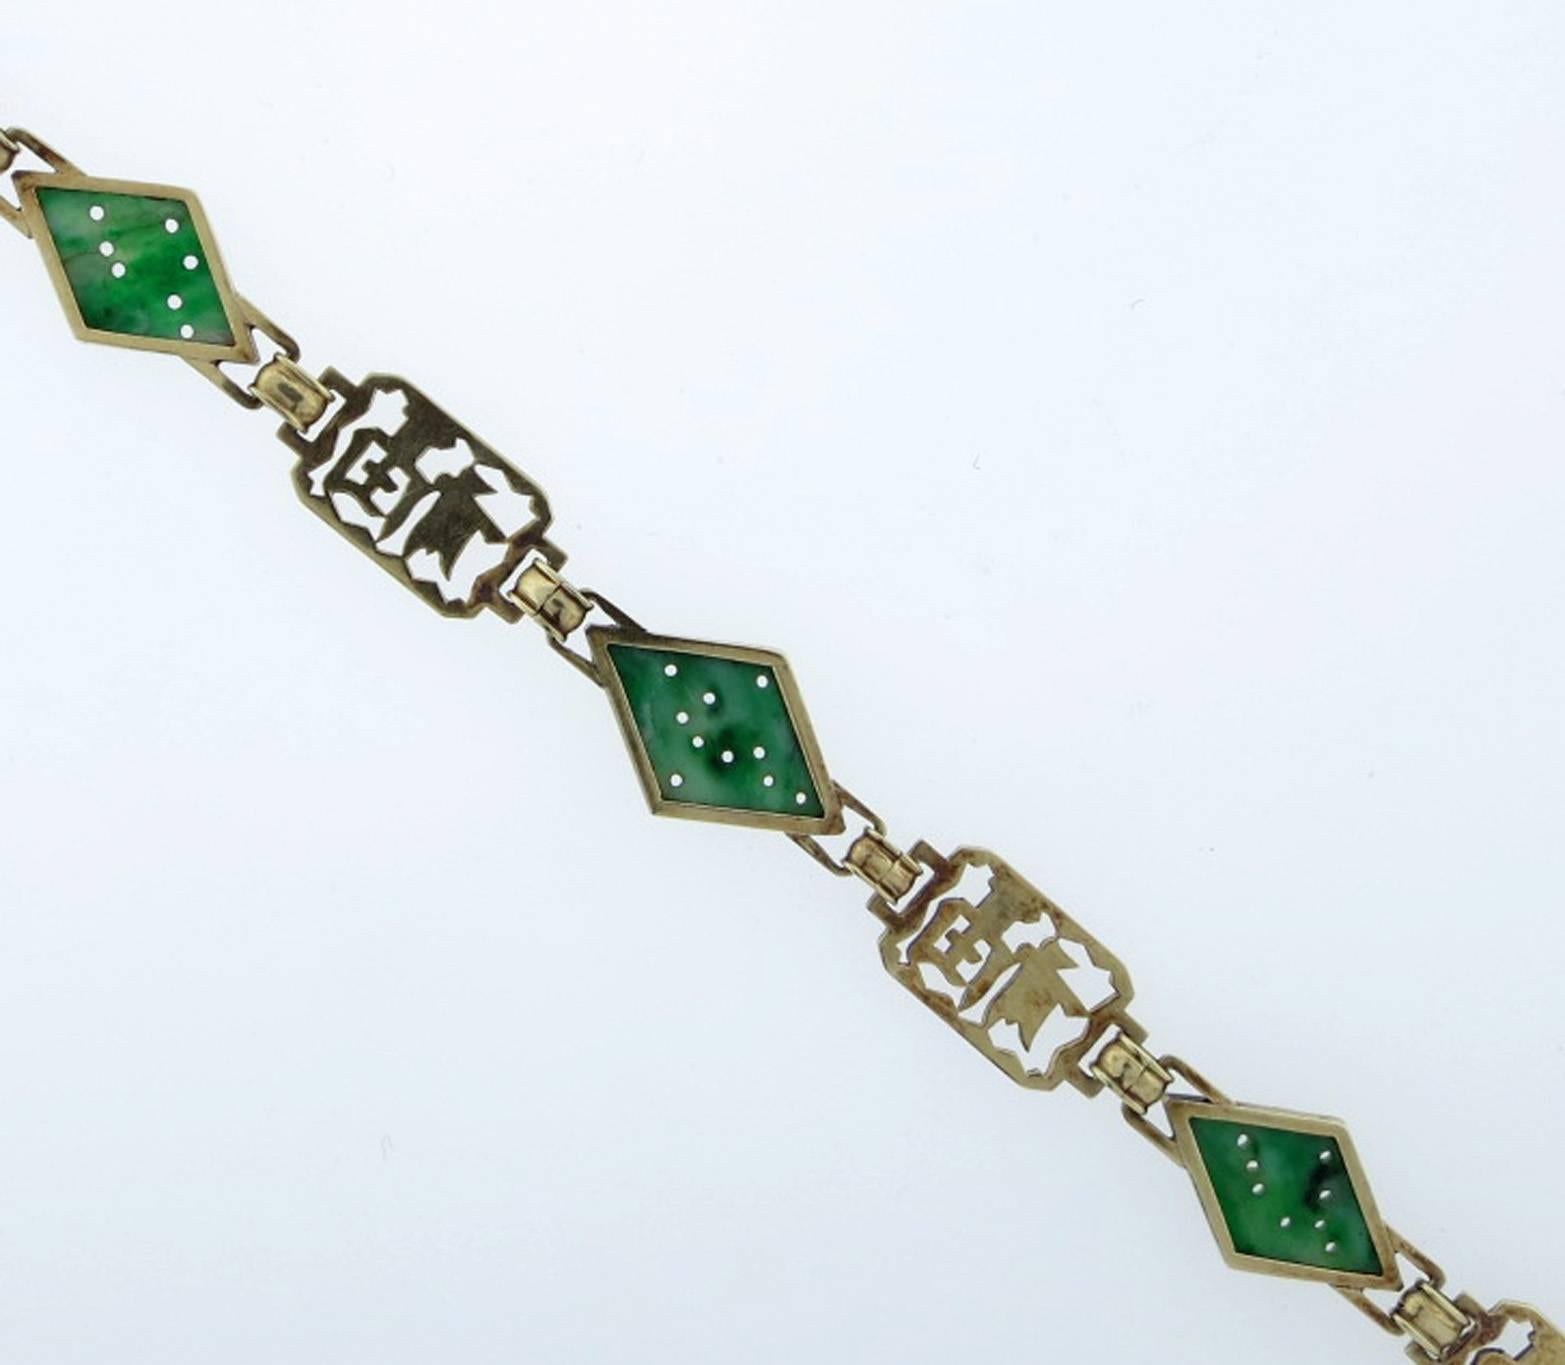 14kt. yellow gold link bracelet with green and black enamel Chinese symbols for a long and happy life with three marquise shape carved jade pieces. The bracelet measures approx 7.5cts. Circa 1930.